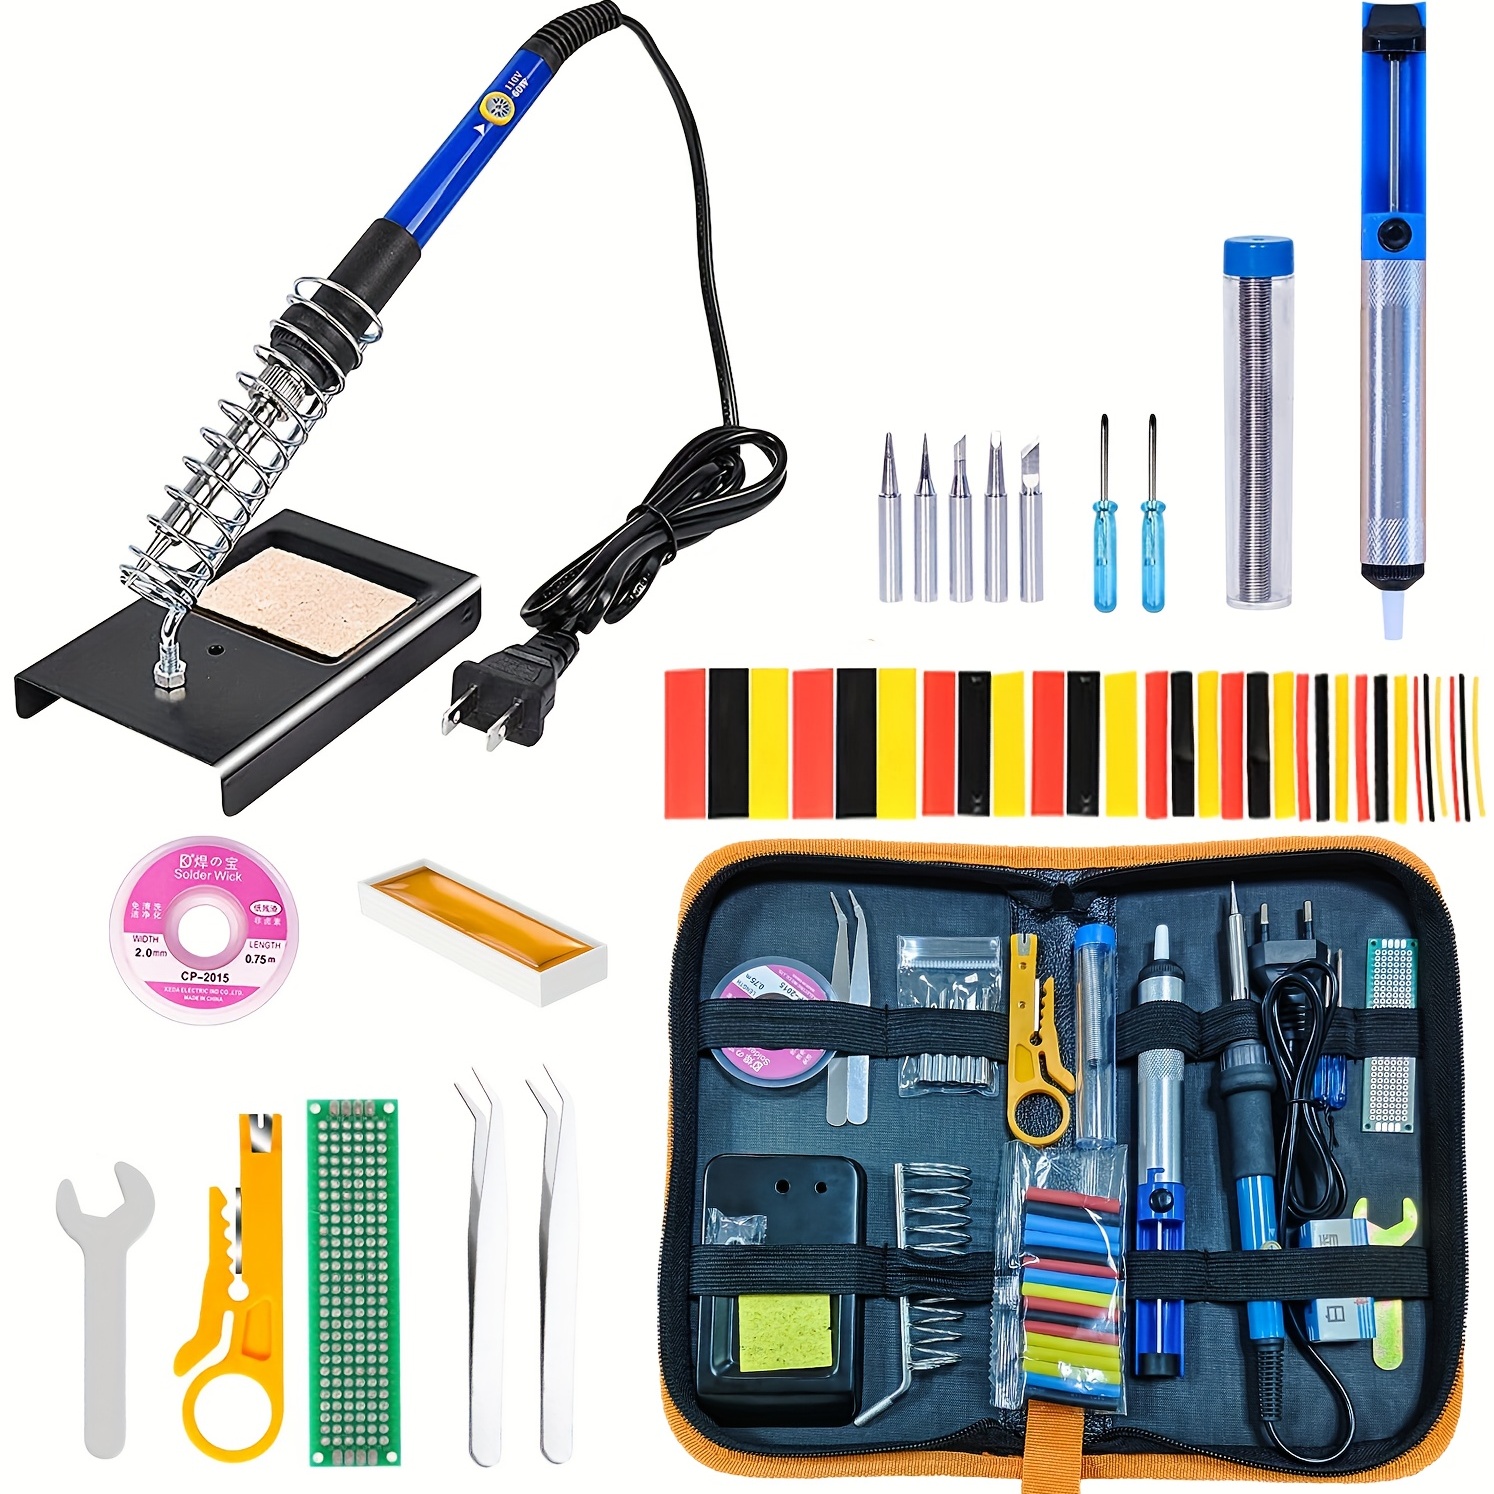 Soldering Iron Kit Electric 60W 110V Adjustable Temperature Soldering Gun  Welding Tools, 5pcs Replacement Tips and Solder Wire Tube (Basic)